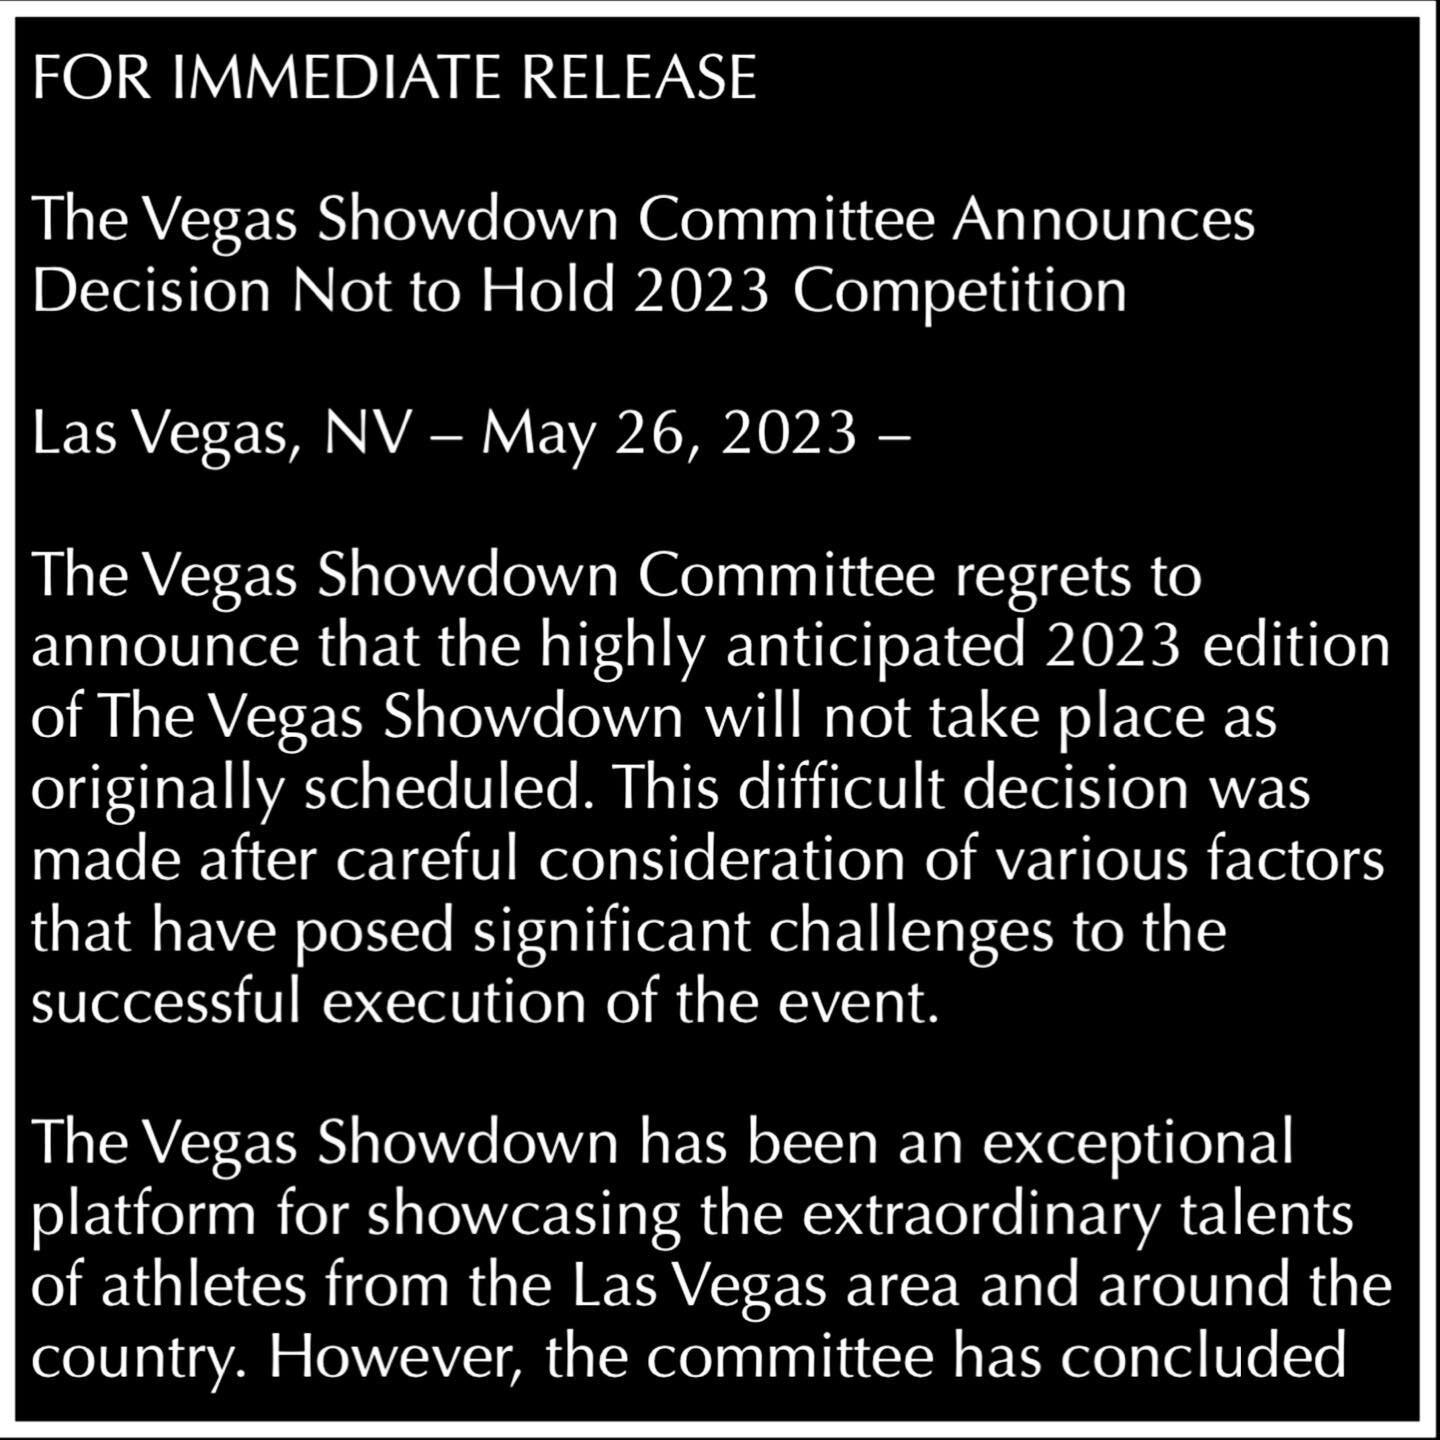 It is with great regret that The Vegas Showdown Committee has decided not to conduct The 2023 Vegas Showdown, and looks forward to its return in 2024.

Thank you to everyone who has supported The Vegas Showdown.

.
.
.
.
.
#TheVegasShowdown #The2023V